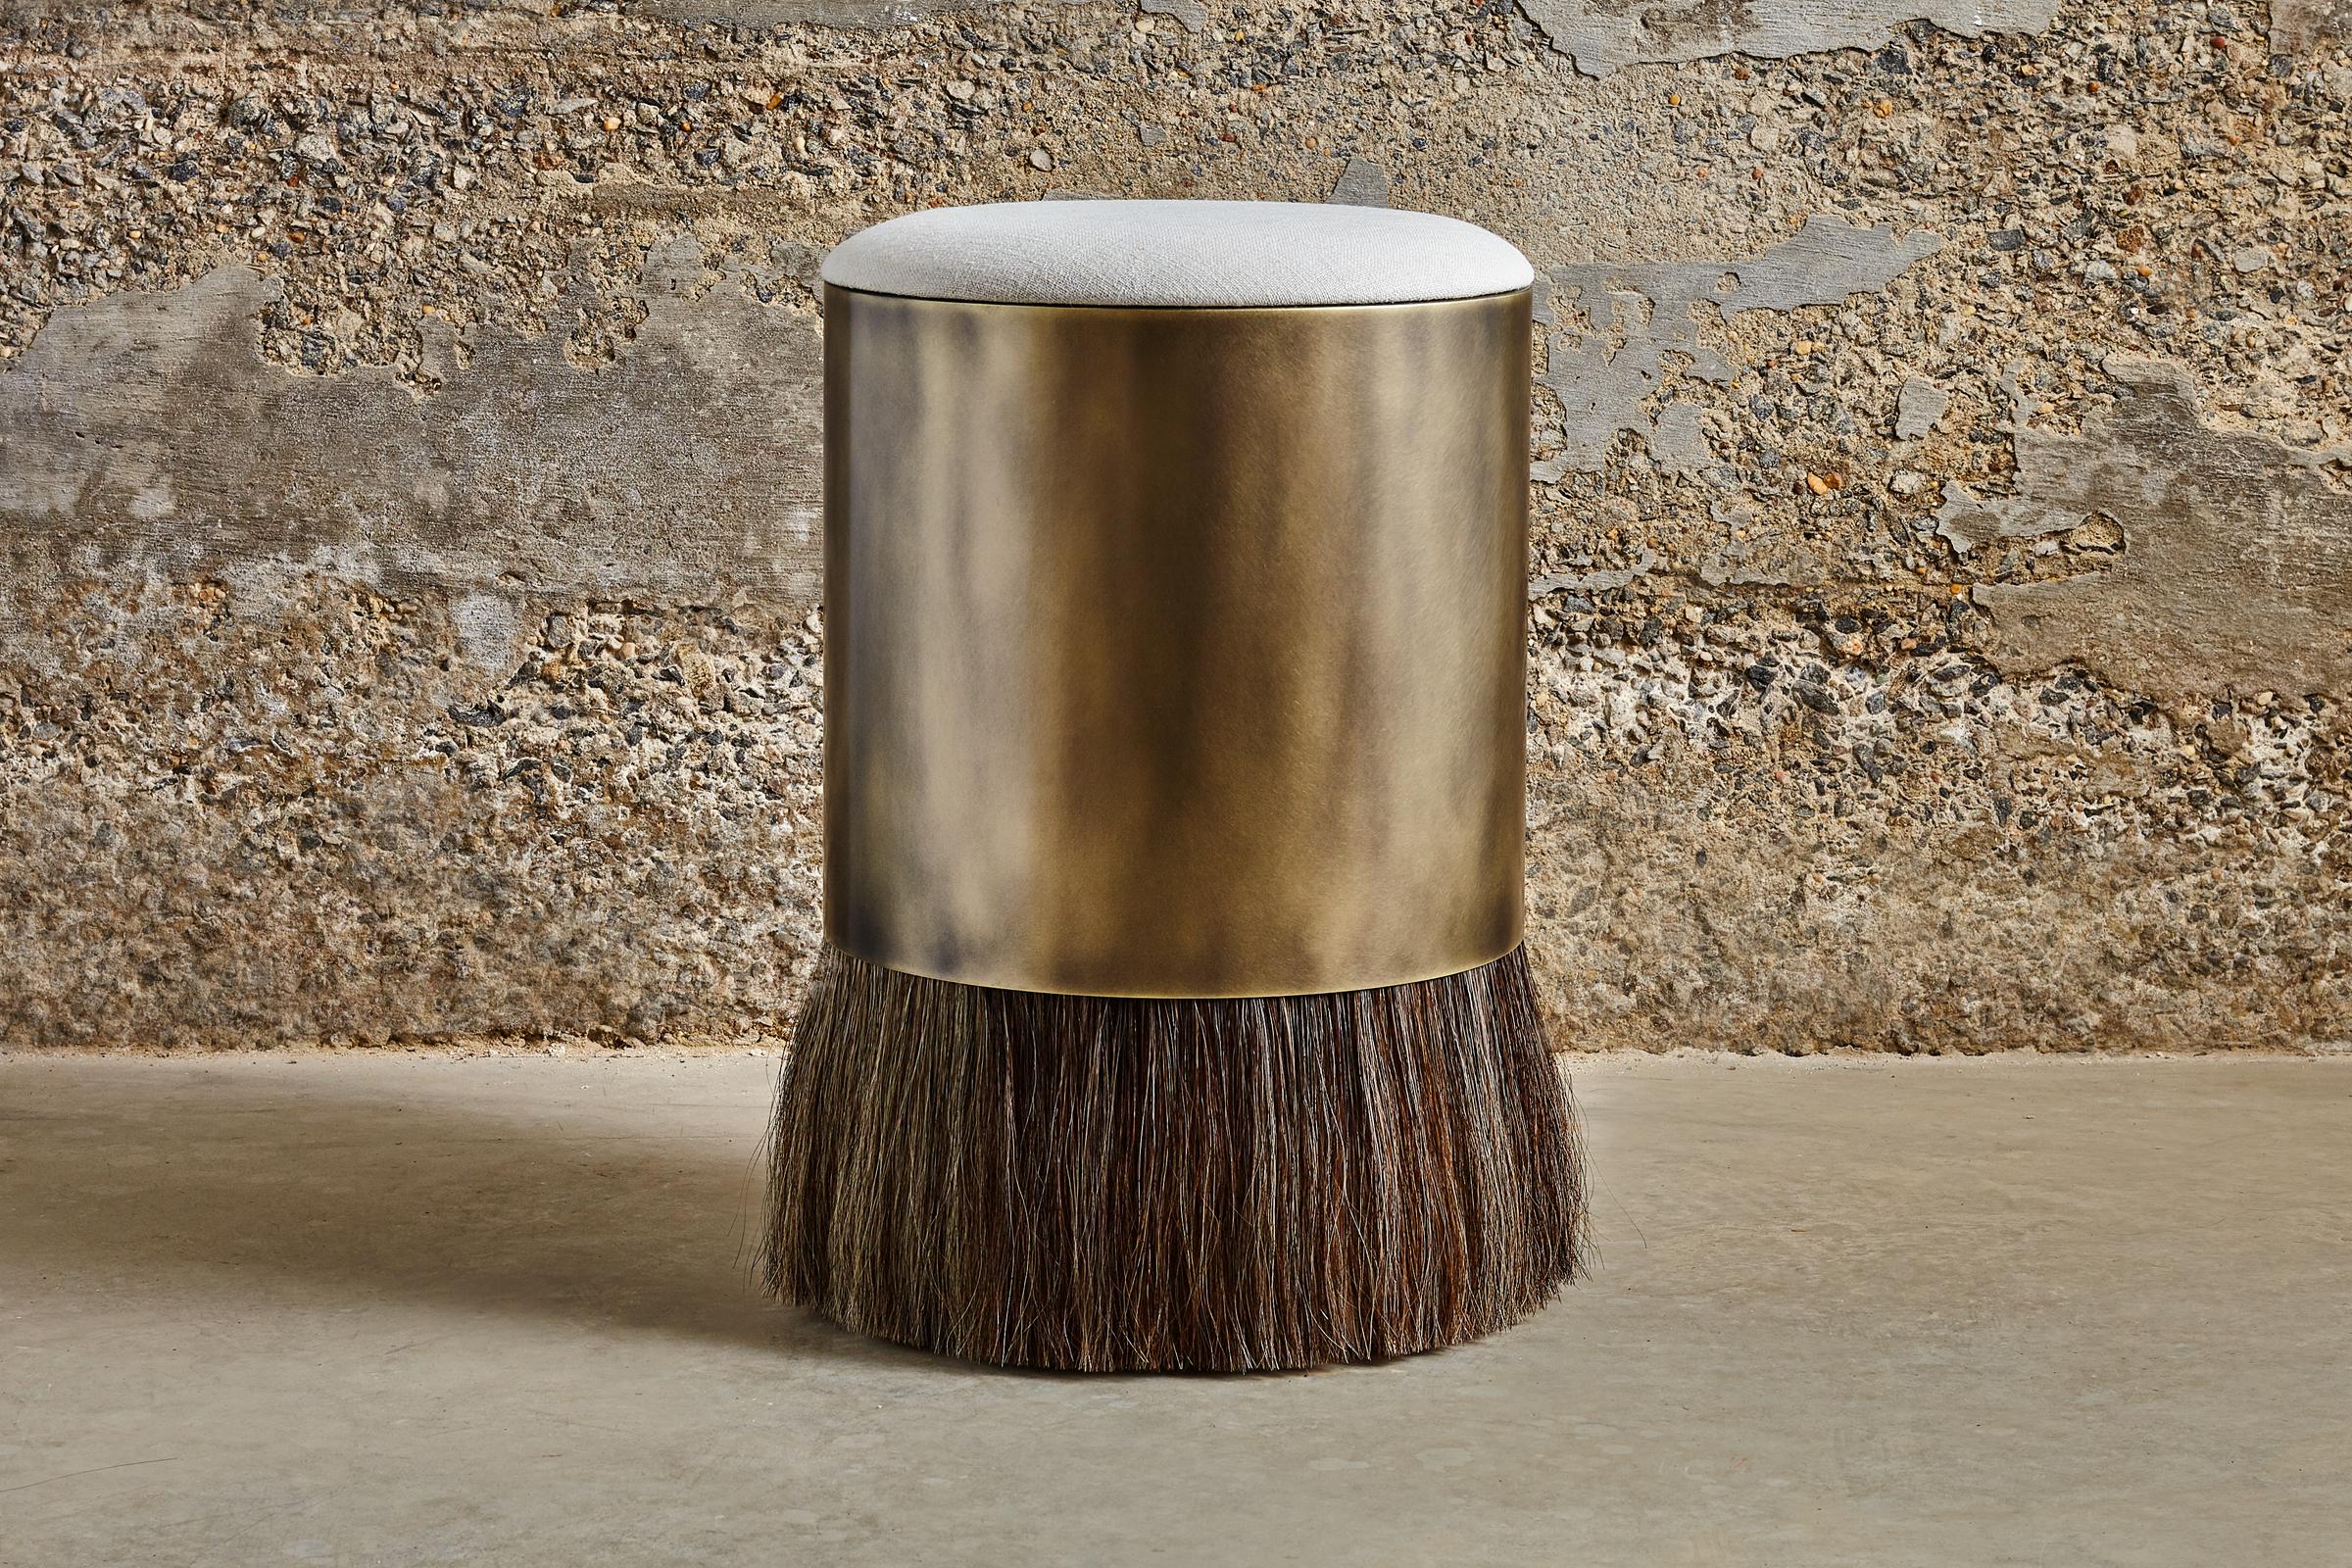 The counter height thing 4 stool features a luxuriously upholstered top, a plated steel drum and horse hair. Refined yet wild, Thing 4's unique personality is accentuated with a distinctive combination of contrasting materials. A variety of horse